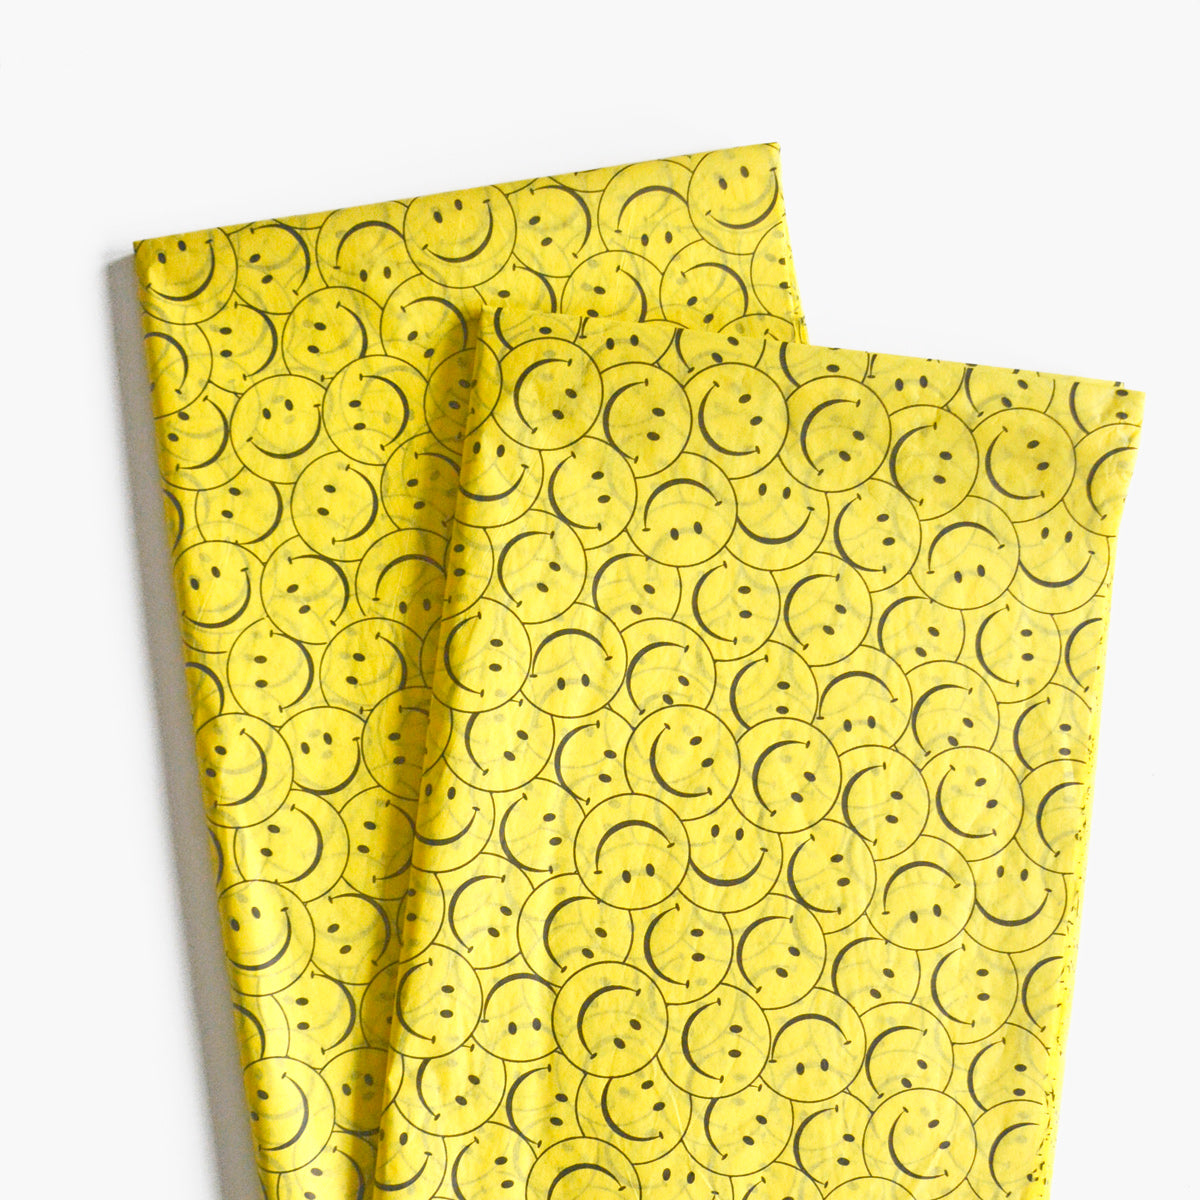 Groovy Smiley Face Tissue Paper - Groovy Themed Gift Wrapping Paper, Bright Yellow Smiley Faces Pattern, Handcraft Supplies